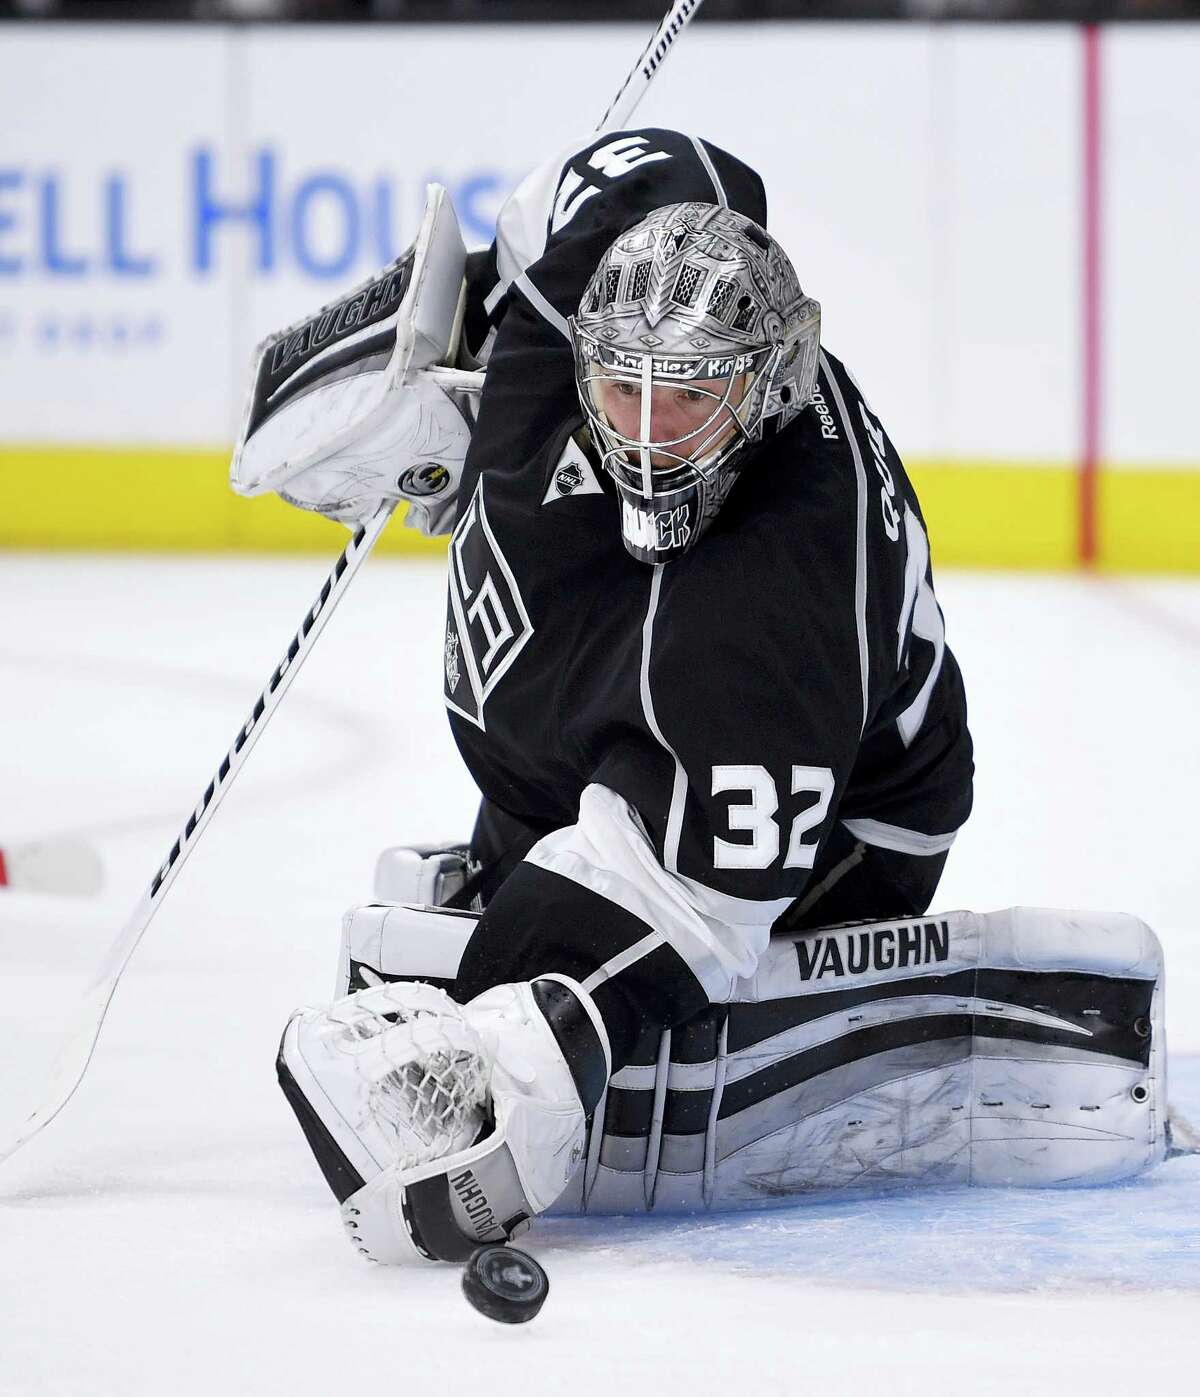 In this Friday file photo, Los Angeles Kings goalie Jonathan Quick, of Hamden, stops a shot during the first period of Game 5 in an NHL hockey Stanley Cup playoffs first-round series against the San Jose Sharks in Los Angeles. The NHL’s injured-reserve list could ice its own all-star lineup. If it seems the league is missing some of its top talent due to injuries a quarter into the season, you’re not mistaken.